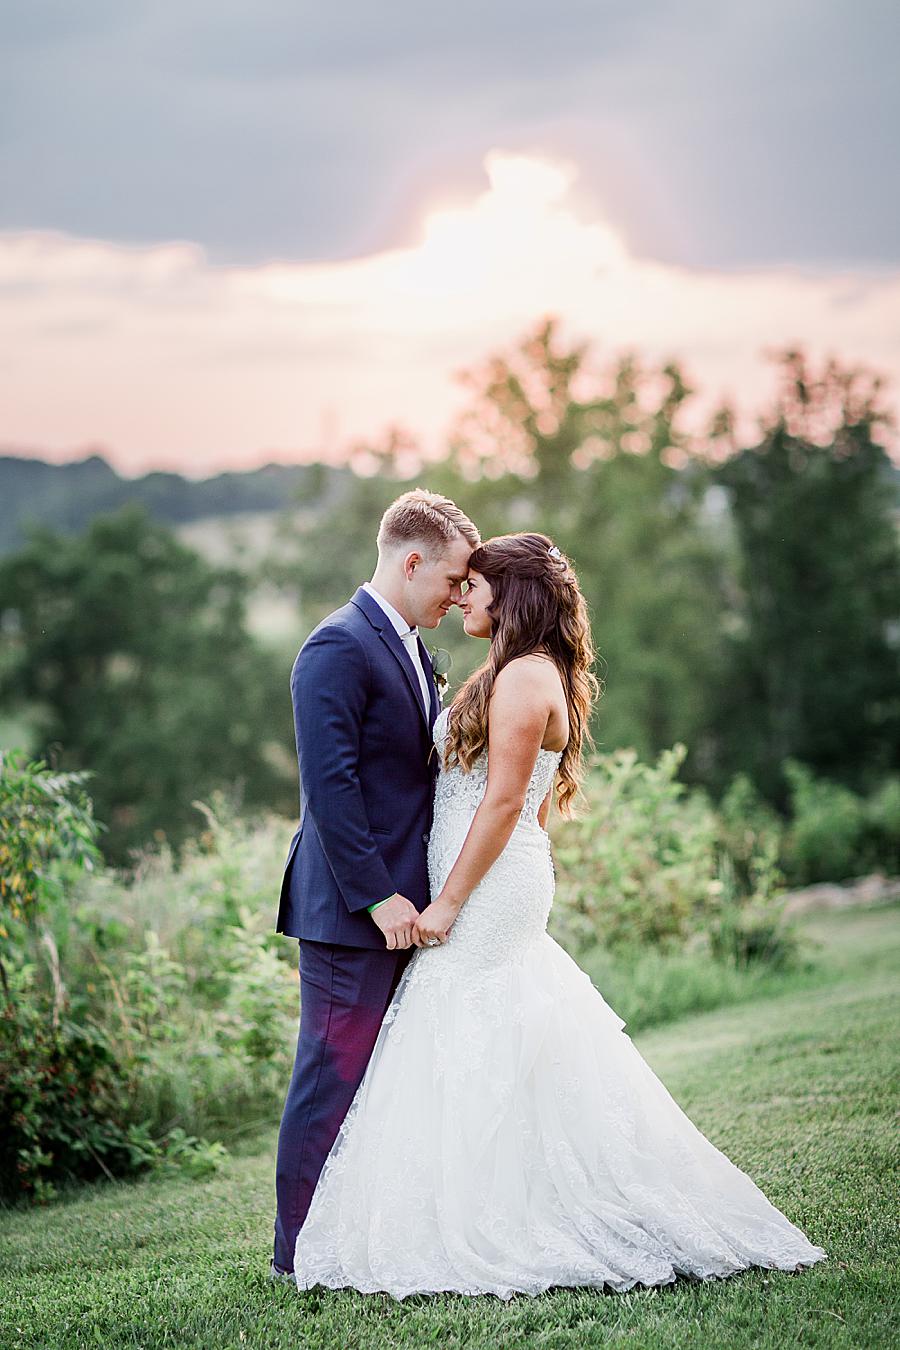 Sunset shots at this WindRiver Wedding Day by Knoxville Wedding Photographer, Amanda May Photos.